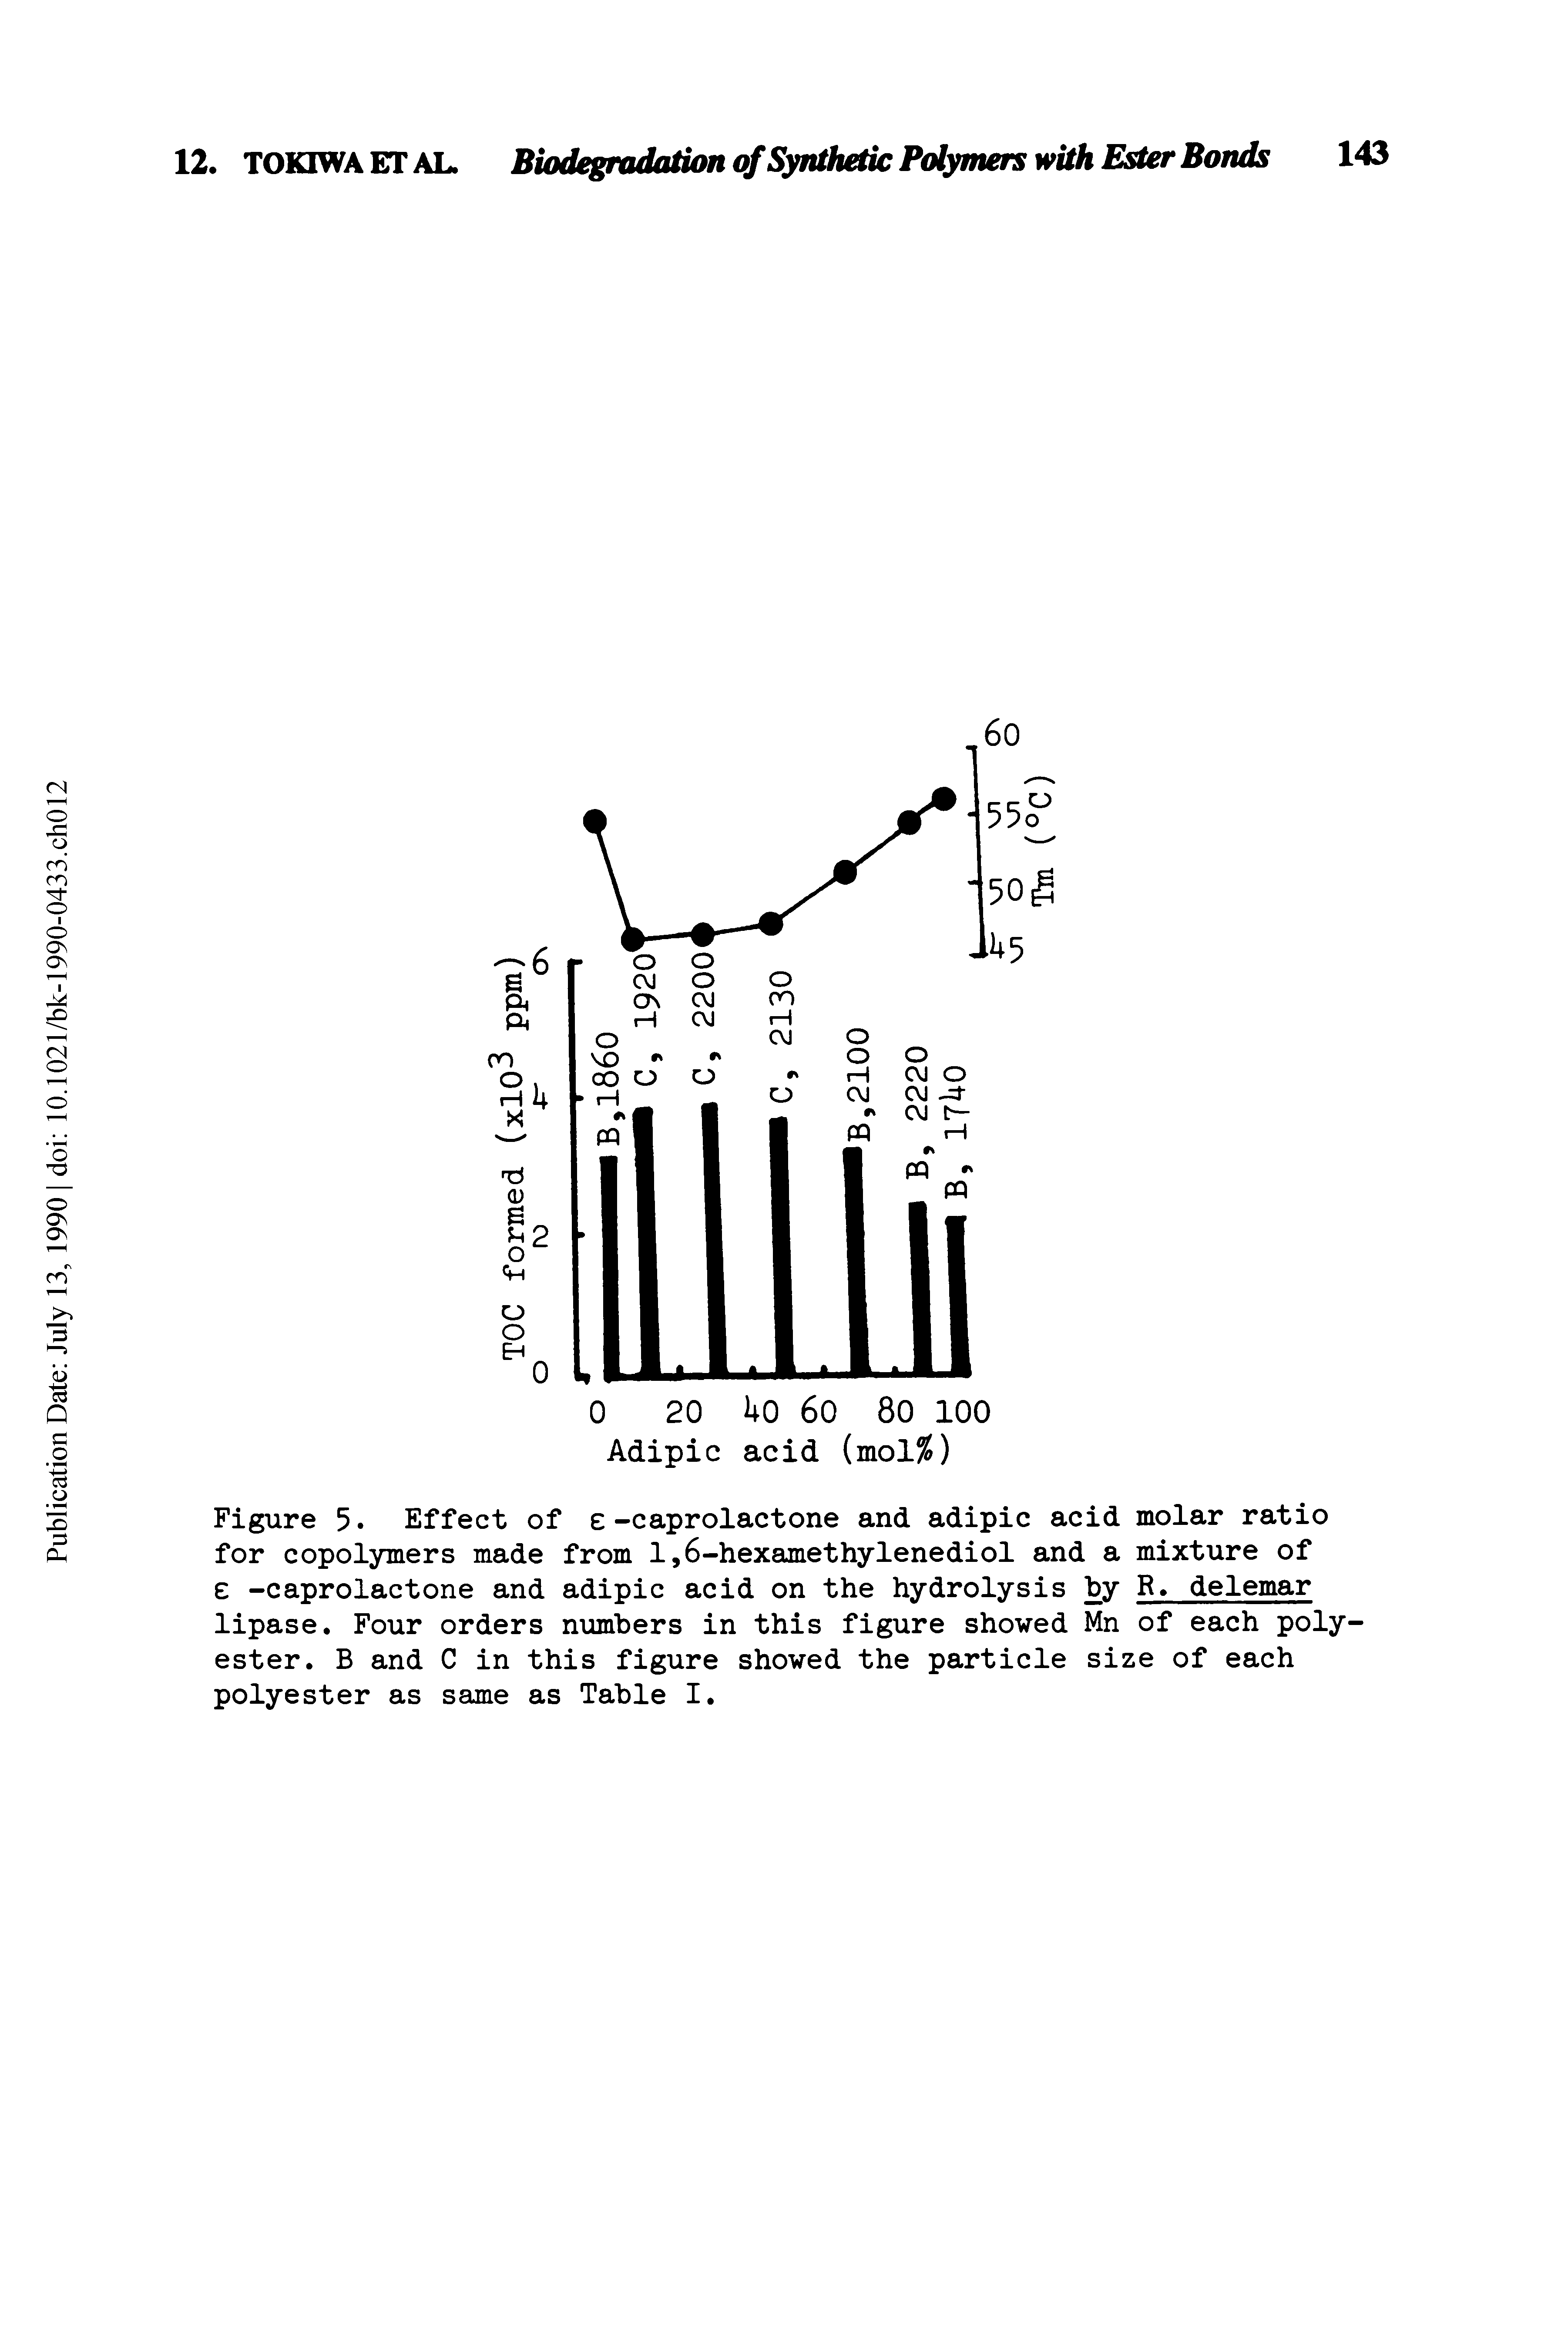 Figure 5. Effect of -caprolactone and adipic acid molar ratio for copolymers made from 1,6-hexamethylenediol and a mixture of -caprolactone and adipic acid on the hydrolysis by R. delemar lipase. Four orders numbers in this figure showed Mn of each polyester. B and C in this figure showed the particle size of each polyester as same as Table I.